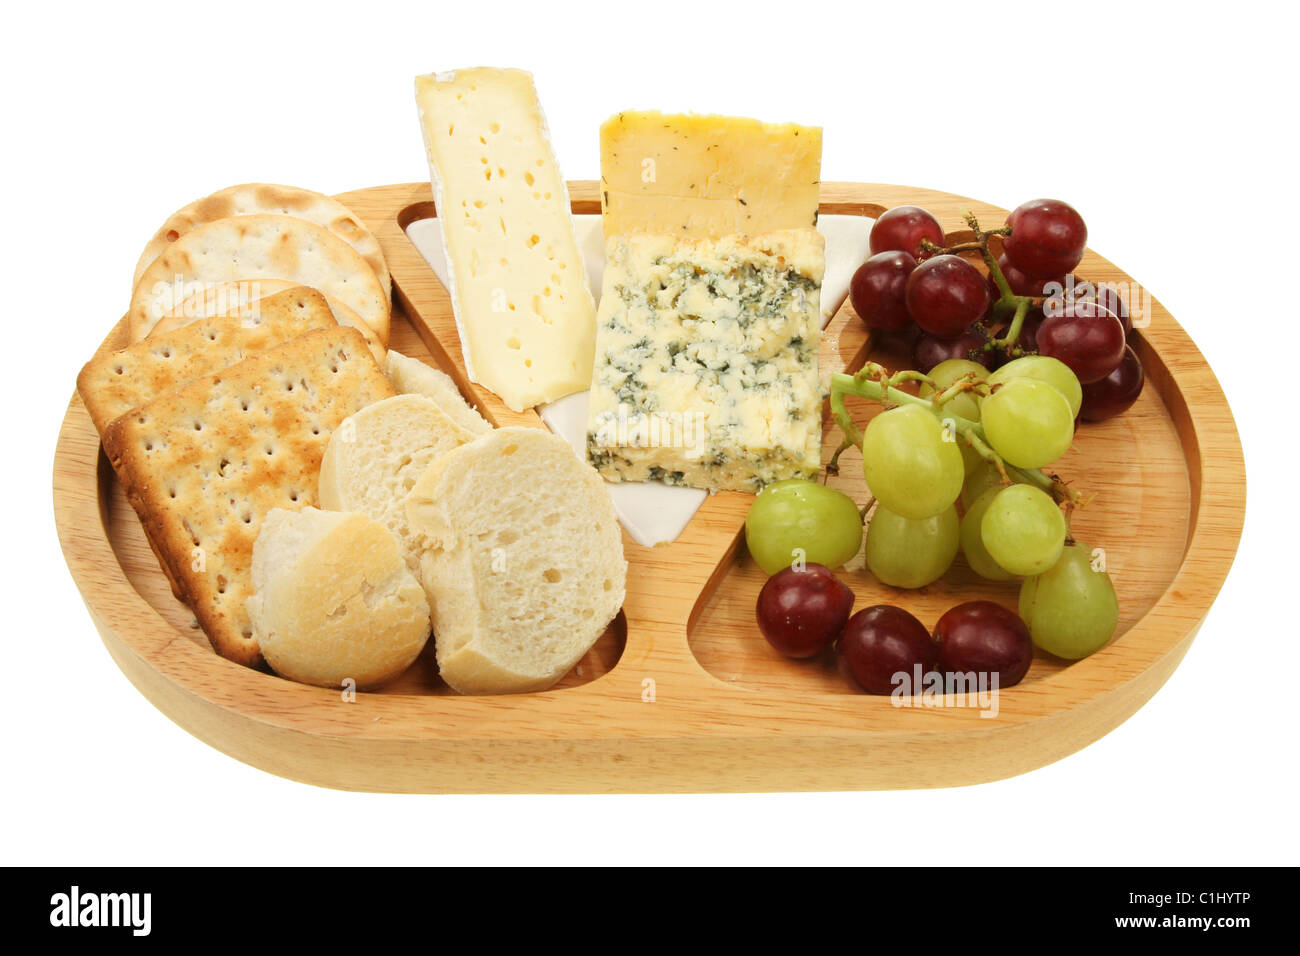 Cheese board with bread,biscuits and grapes Stock Photo